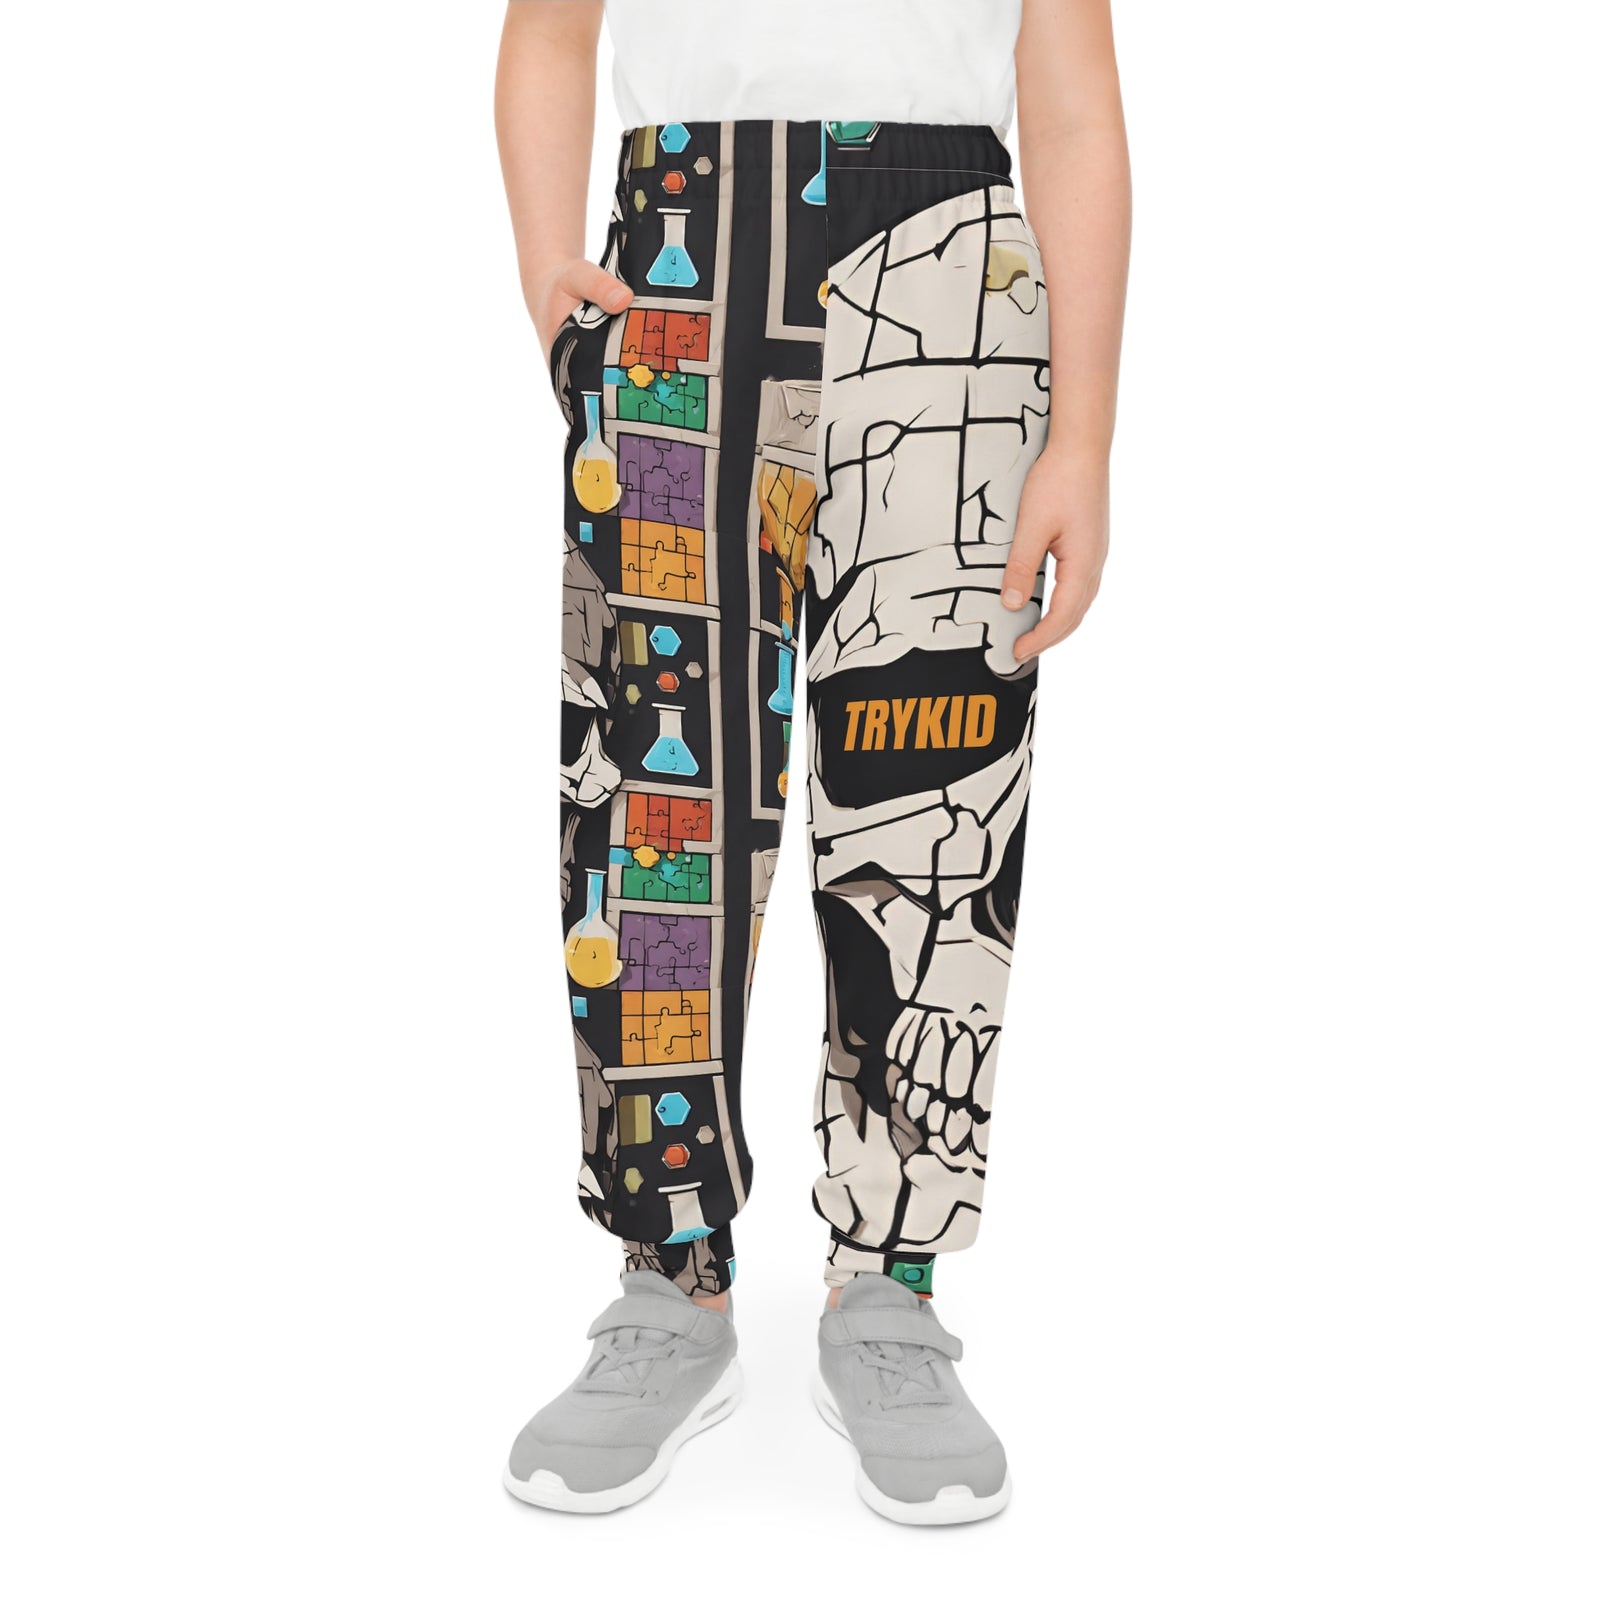 TryKid Logo Youth Joggers with Unique Laboratory Skull Design (AOP) for Trendsetting Youth and Kids Fashion